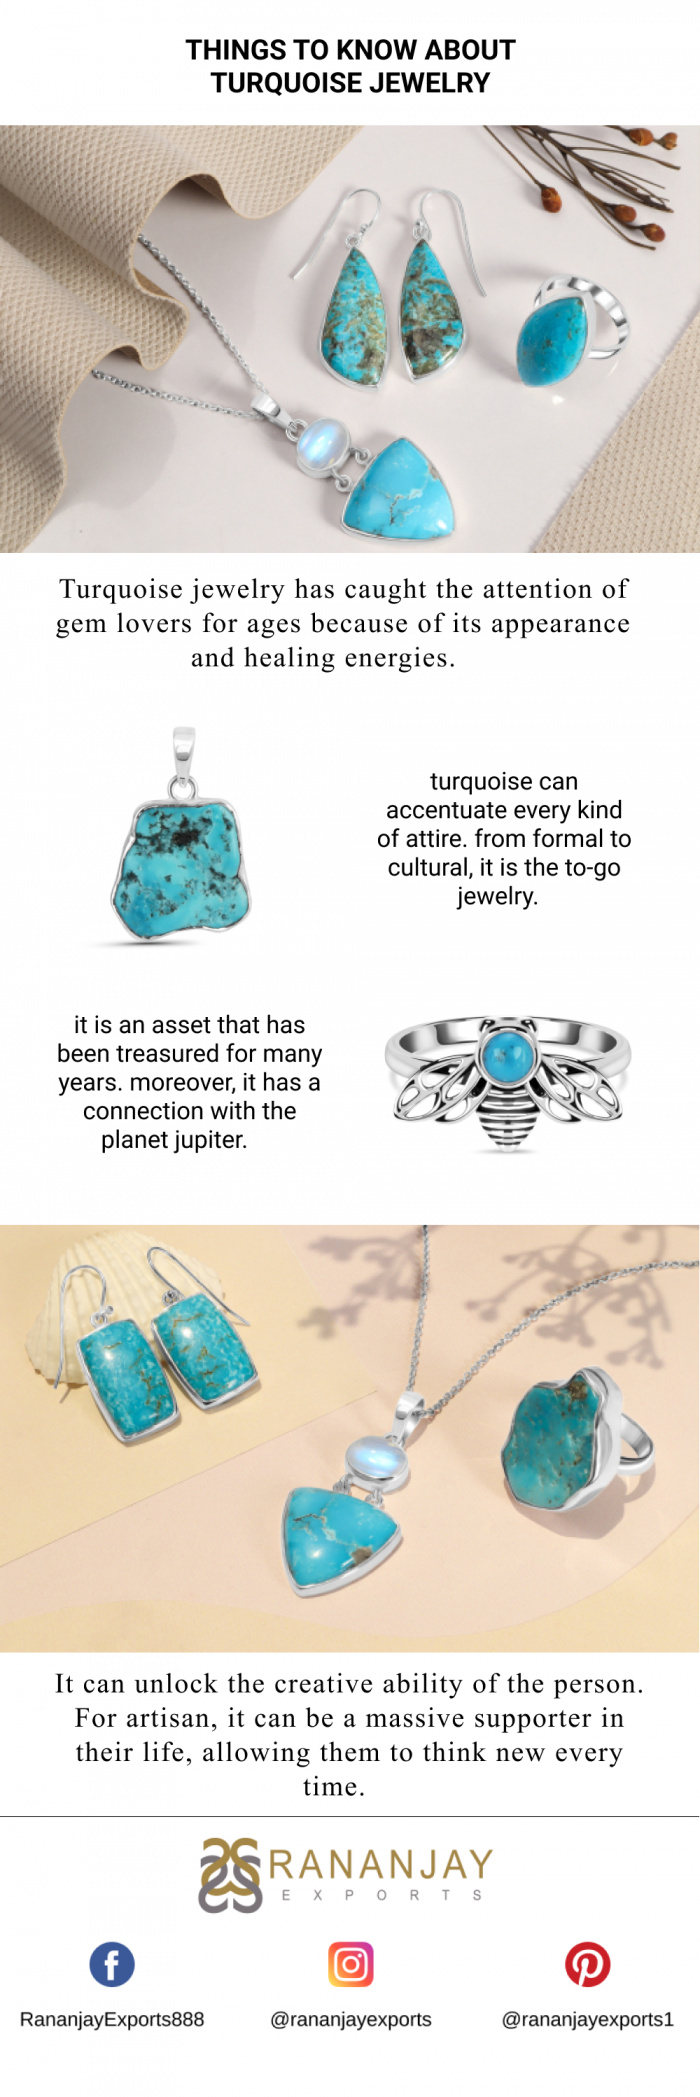 Things to know about Turquoise jewelry